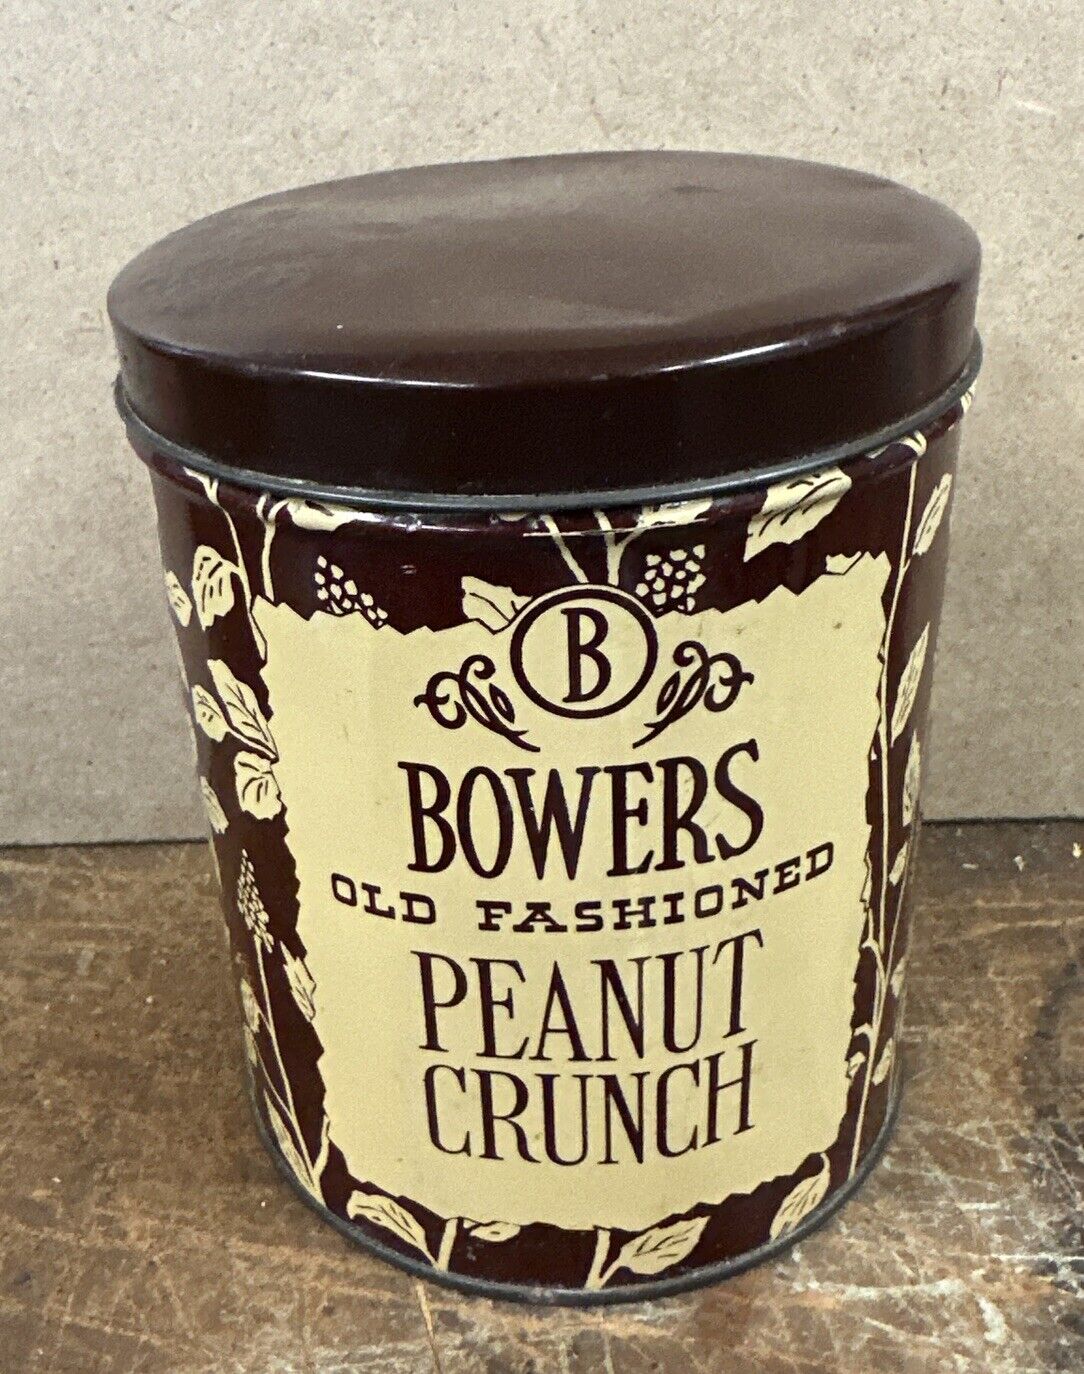 VINTAGE BOWERS OLD FASHIONED PEANUT CRUNCH CANDY TIN